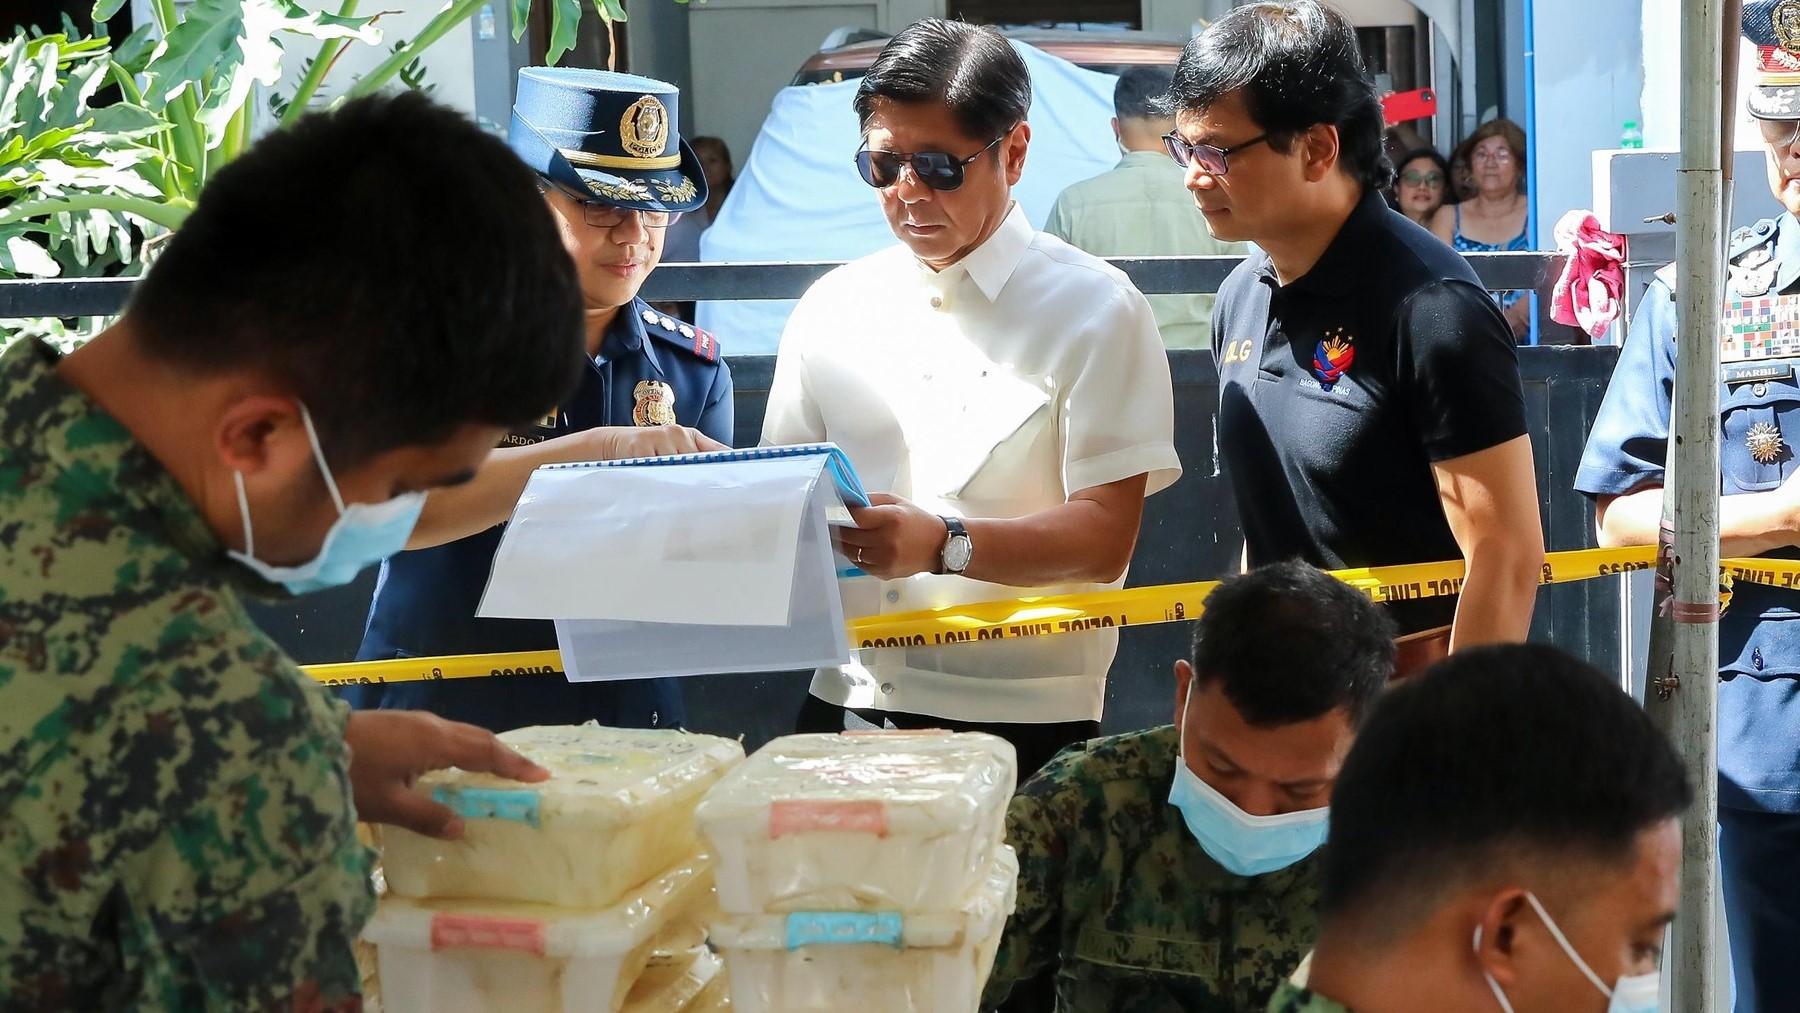 The P13.3 billion worth of shabu seized in Batangas came from a different source compared to the illegal drugs confiscated in previous operations.